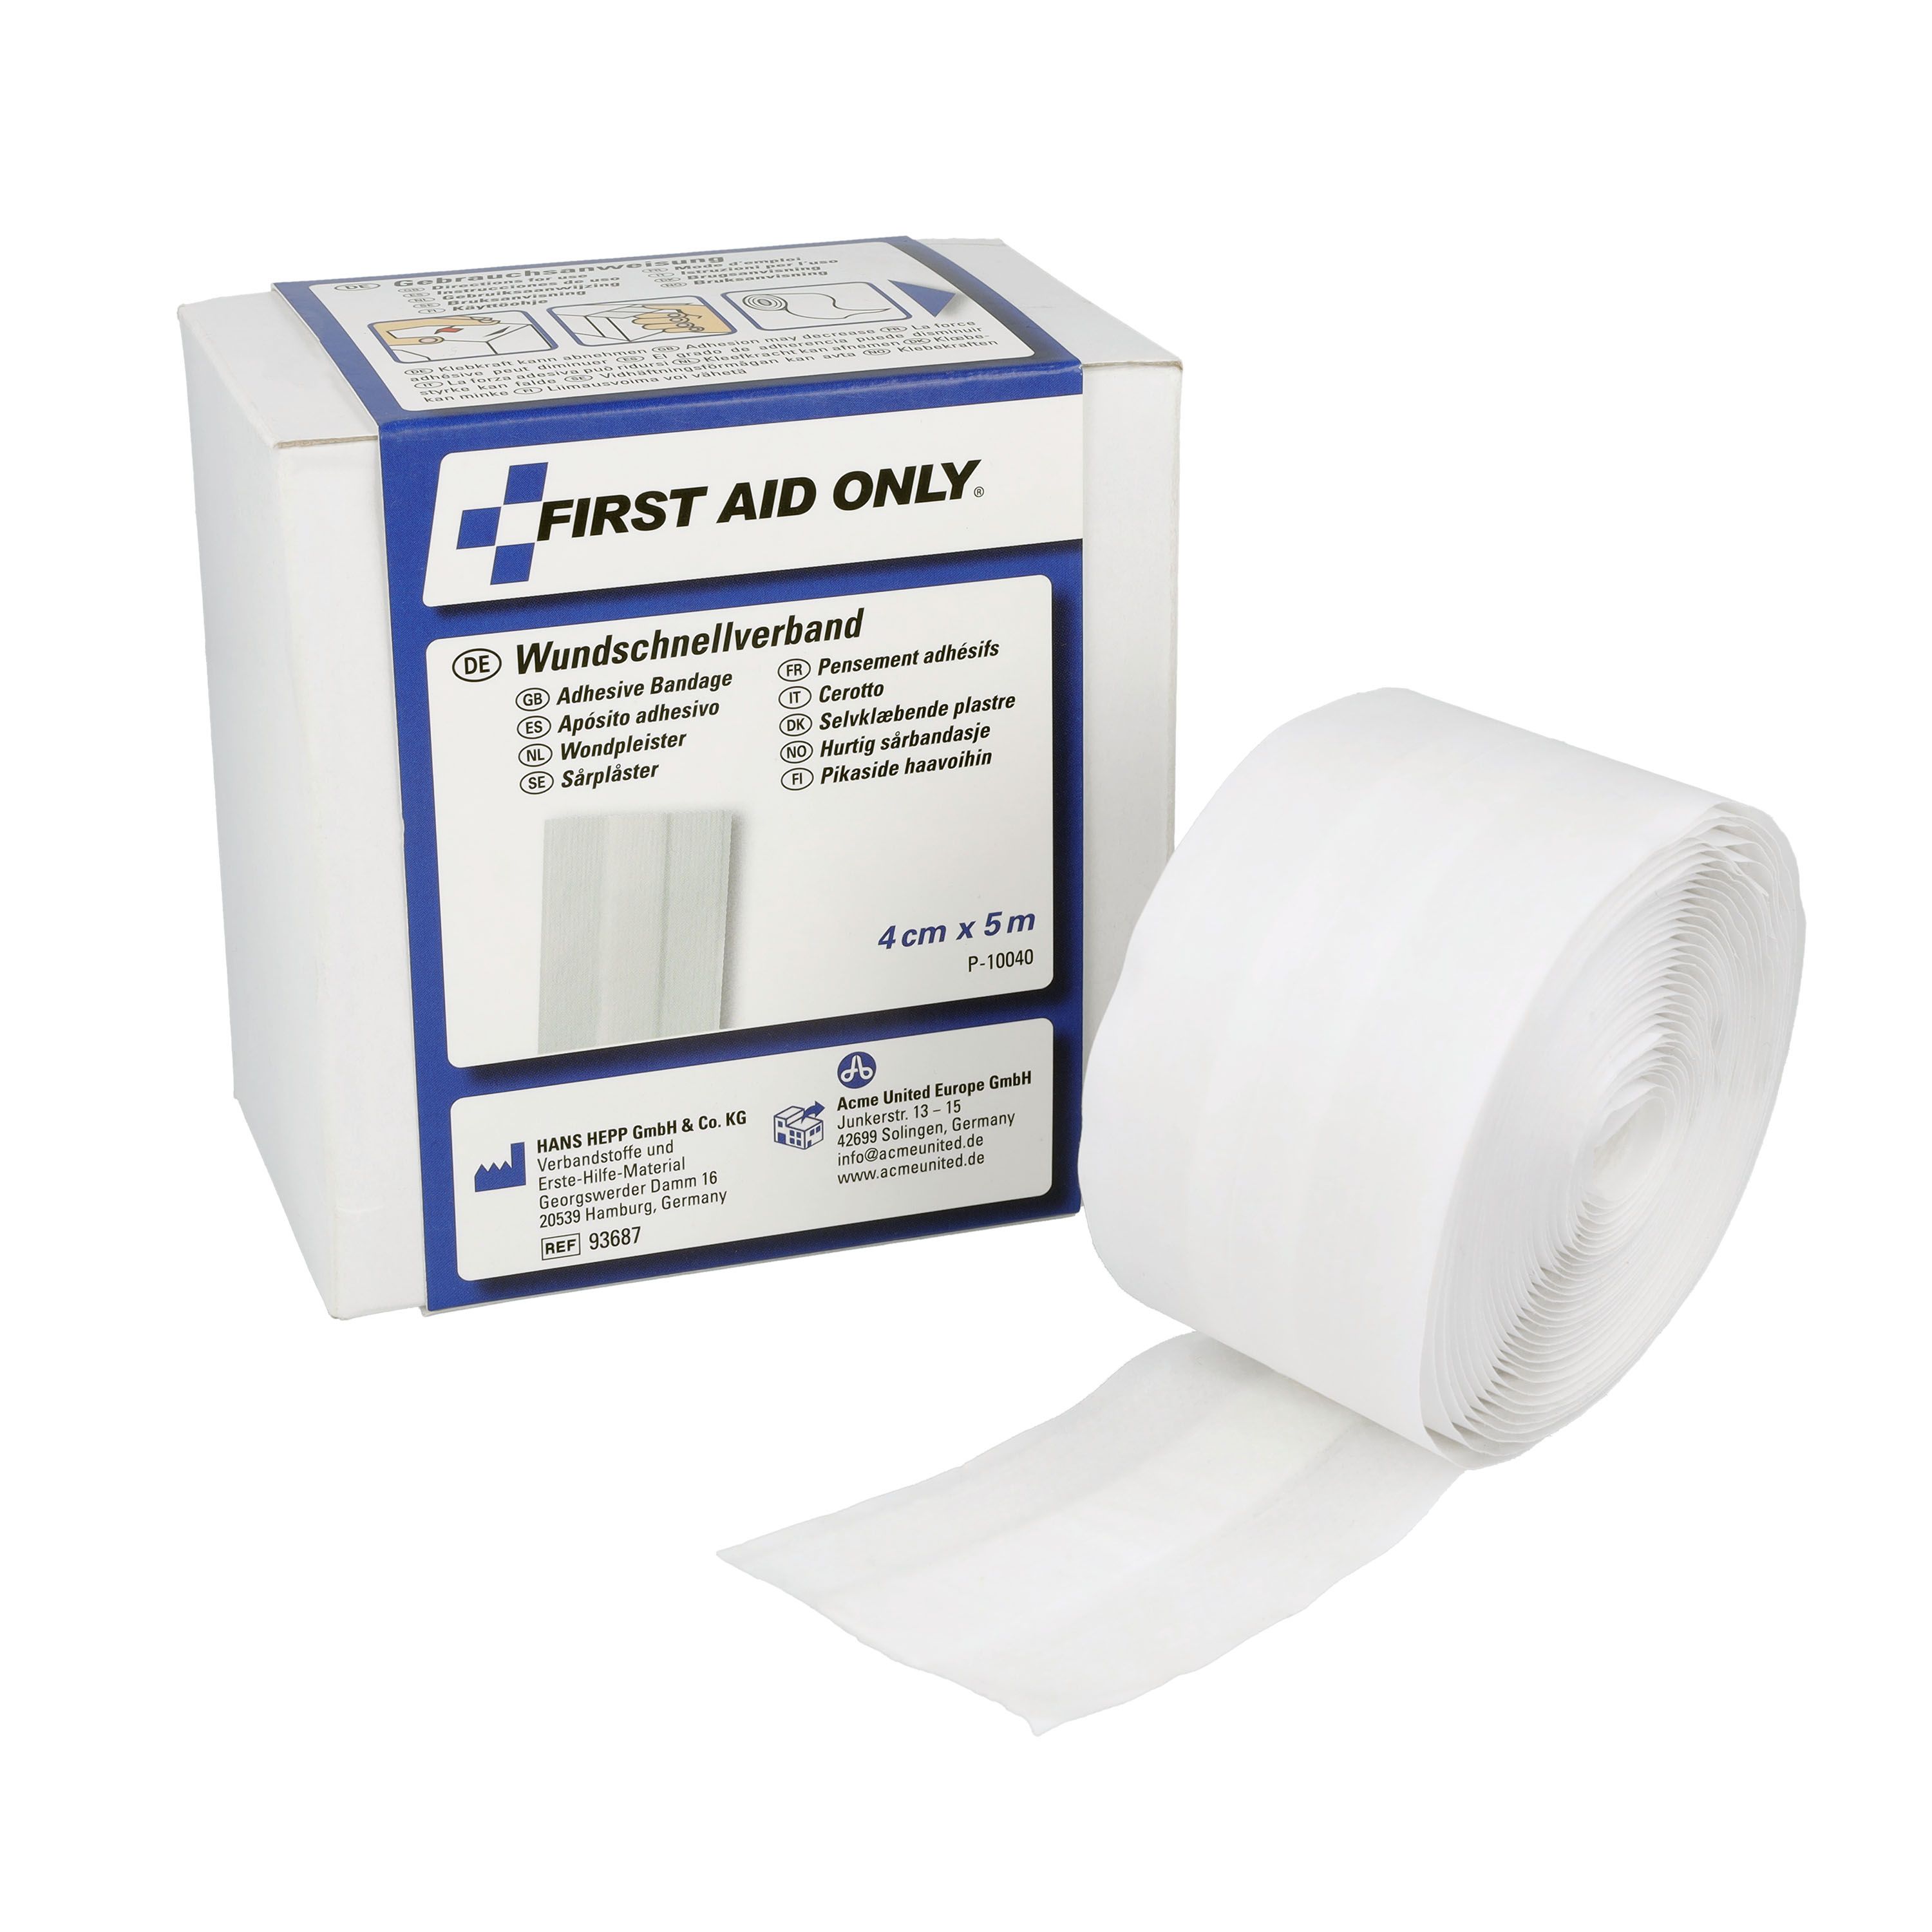 First Aid Only Pflaster Rolle 5 Meter x 4 cm